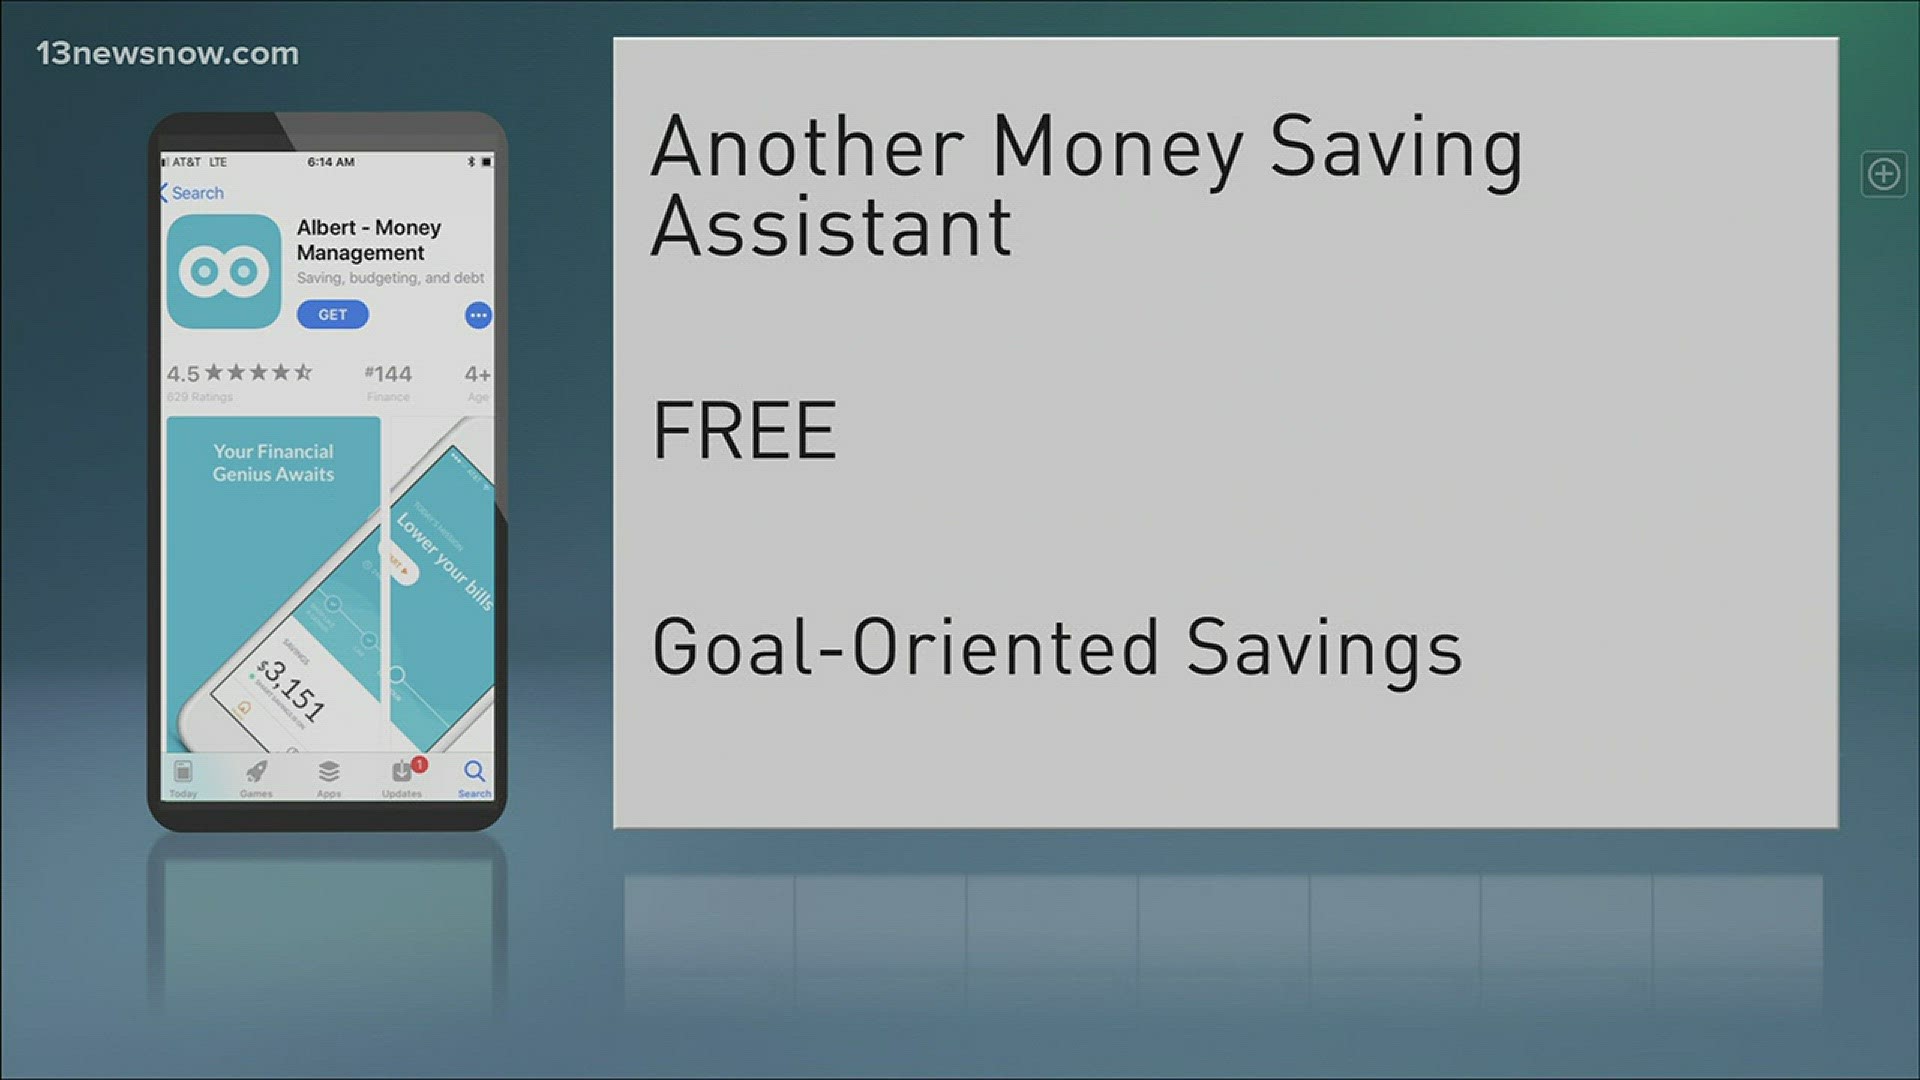 Tim Pandajis is here with some apps that may help you make and save money.